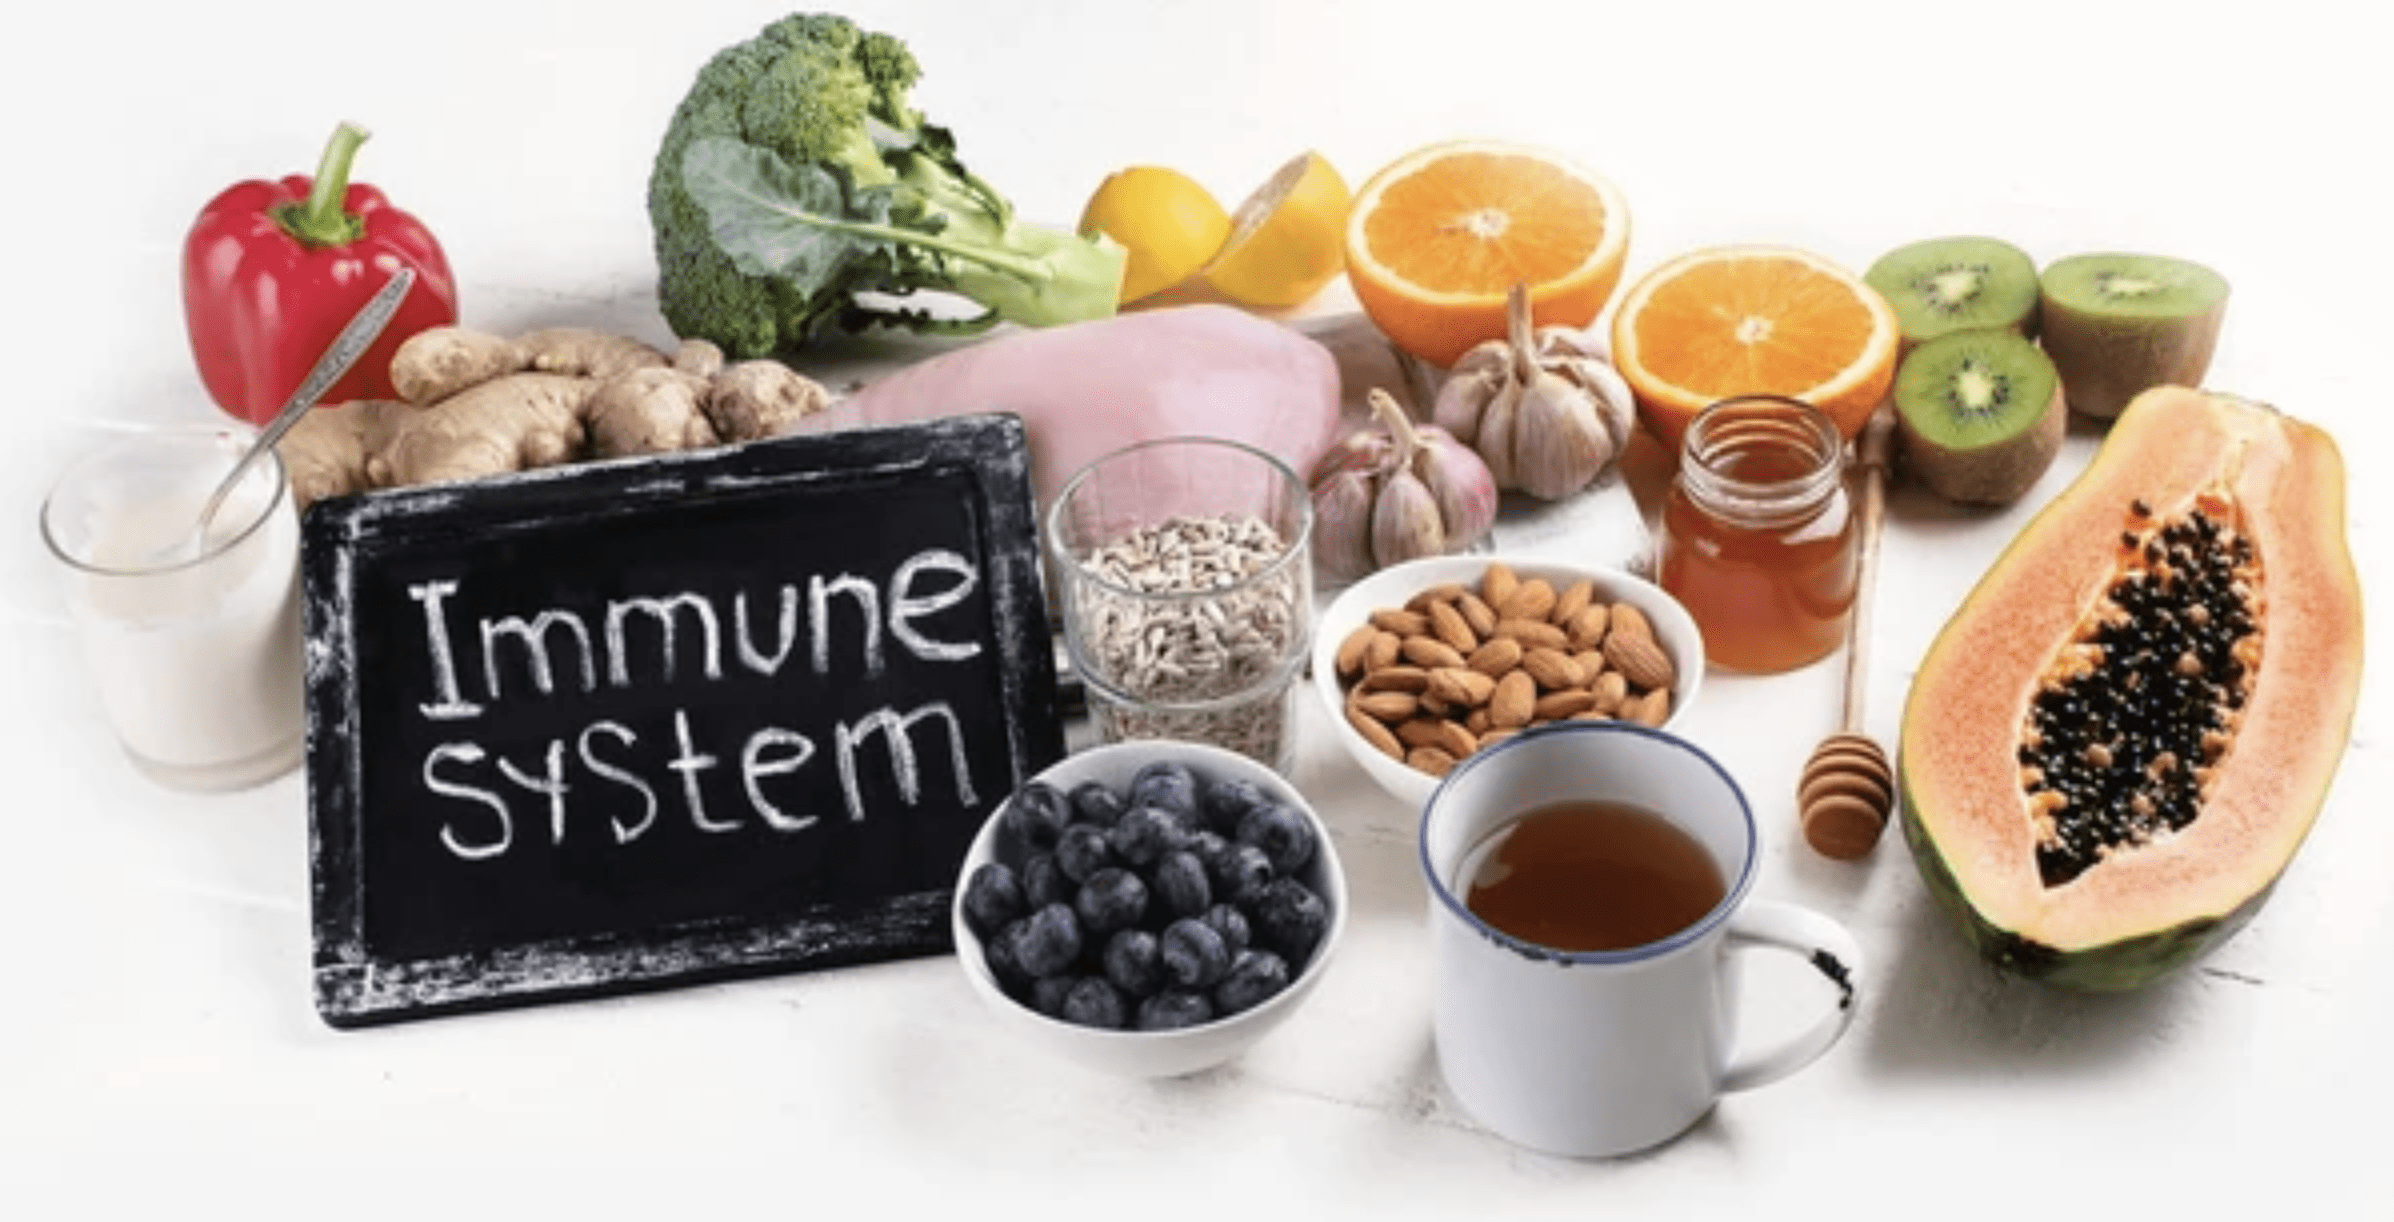 A PROACTIVE GUIDE TO IMMUNITY